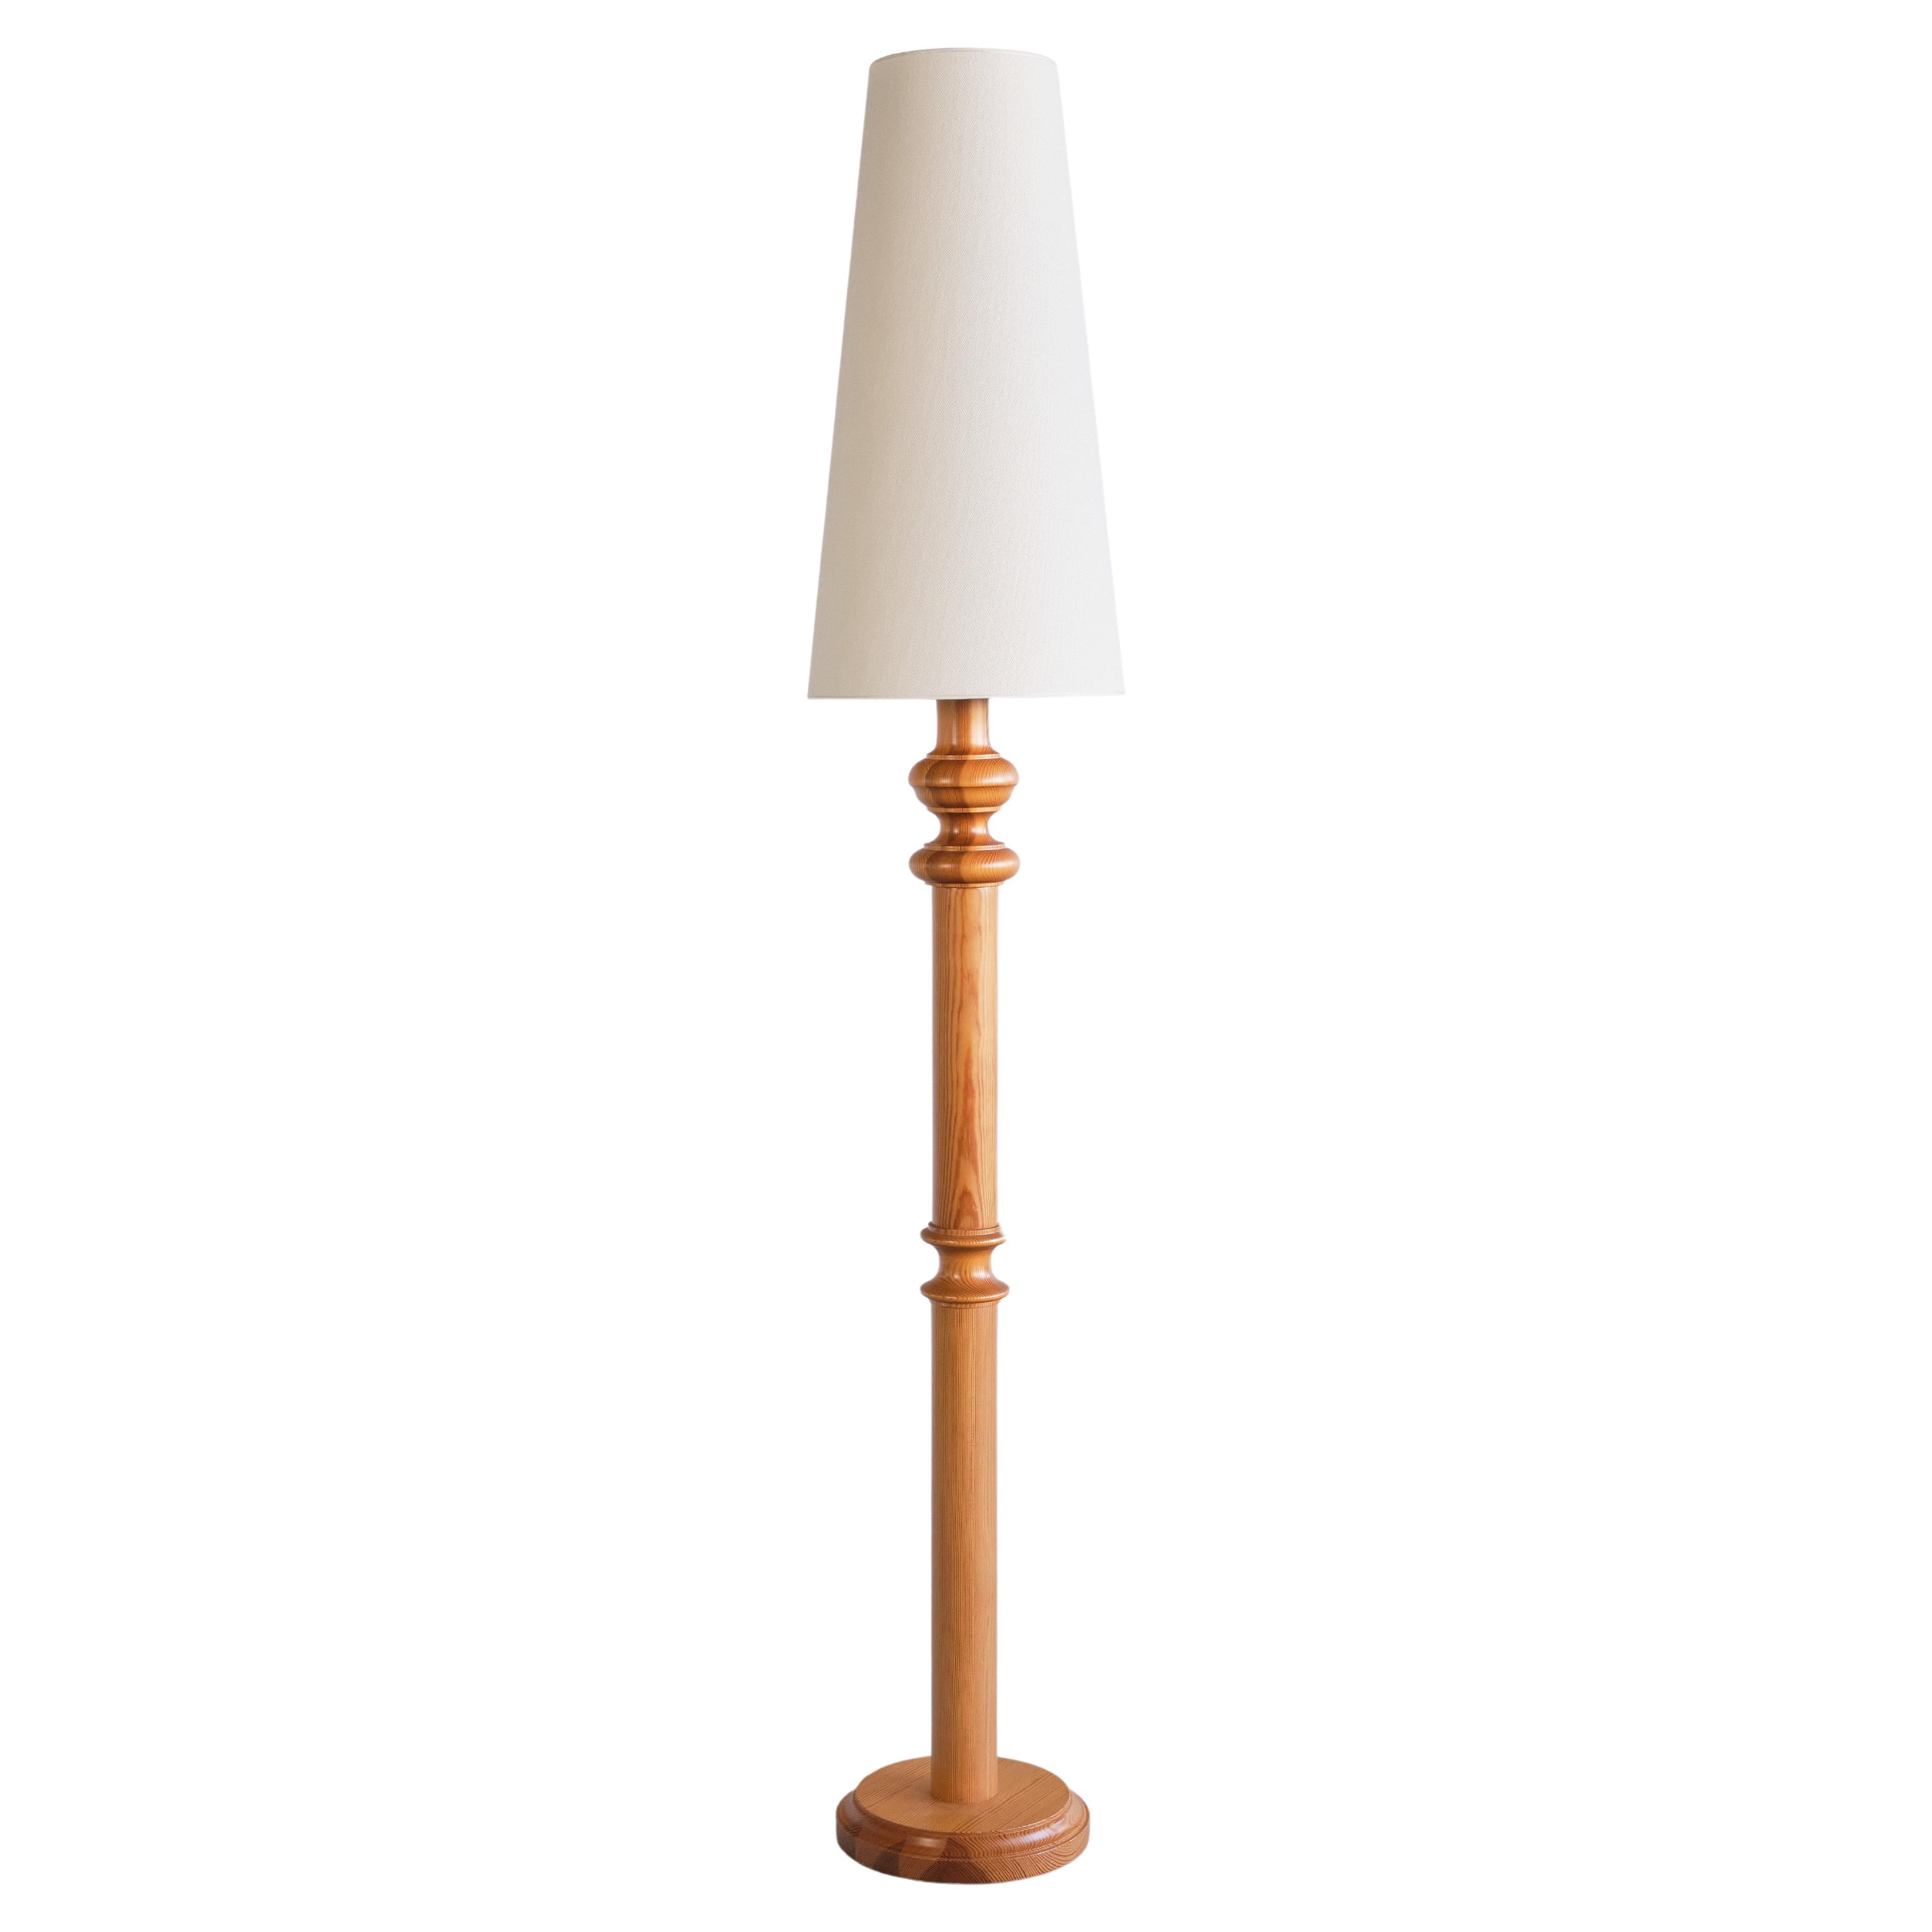 Nybro Armaturfabric Tall Floor Lamp in Solid Pine Wood, Sweden, 1960s For Sale